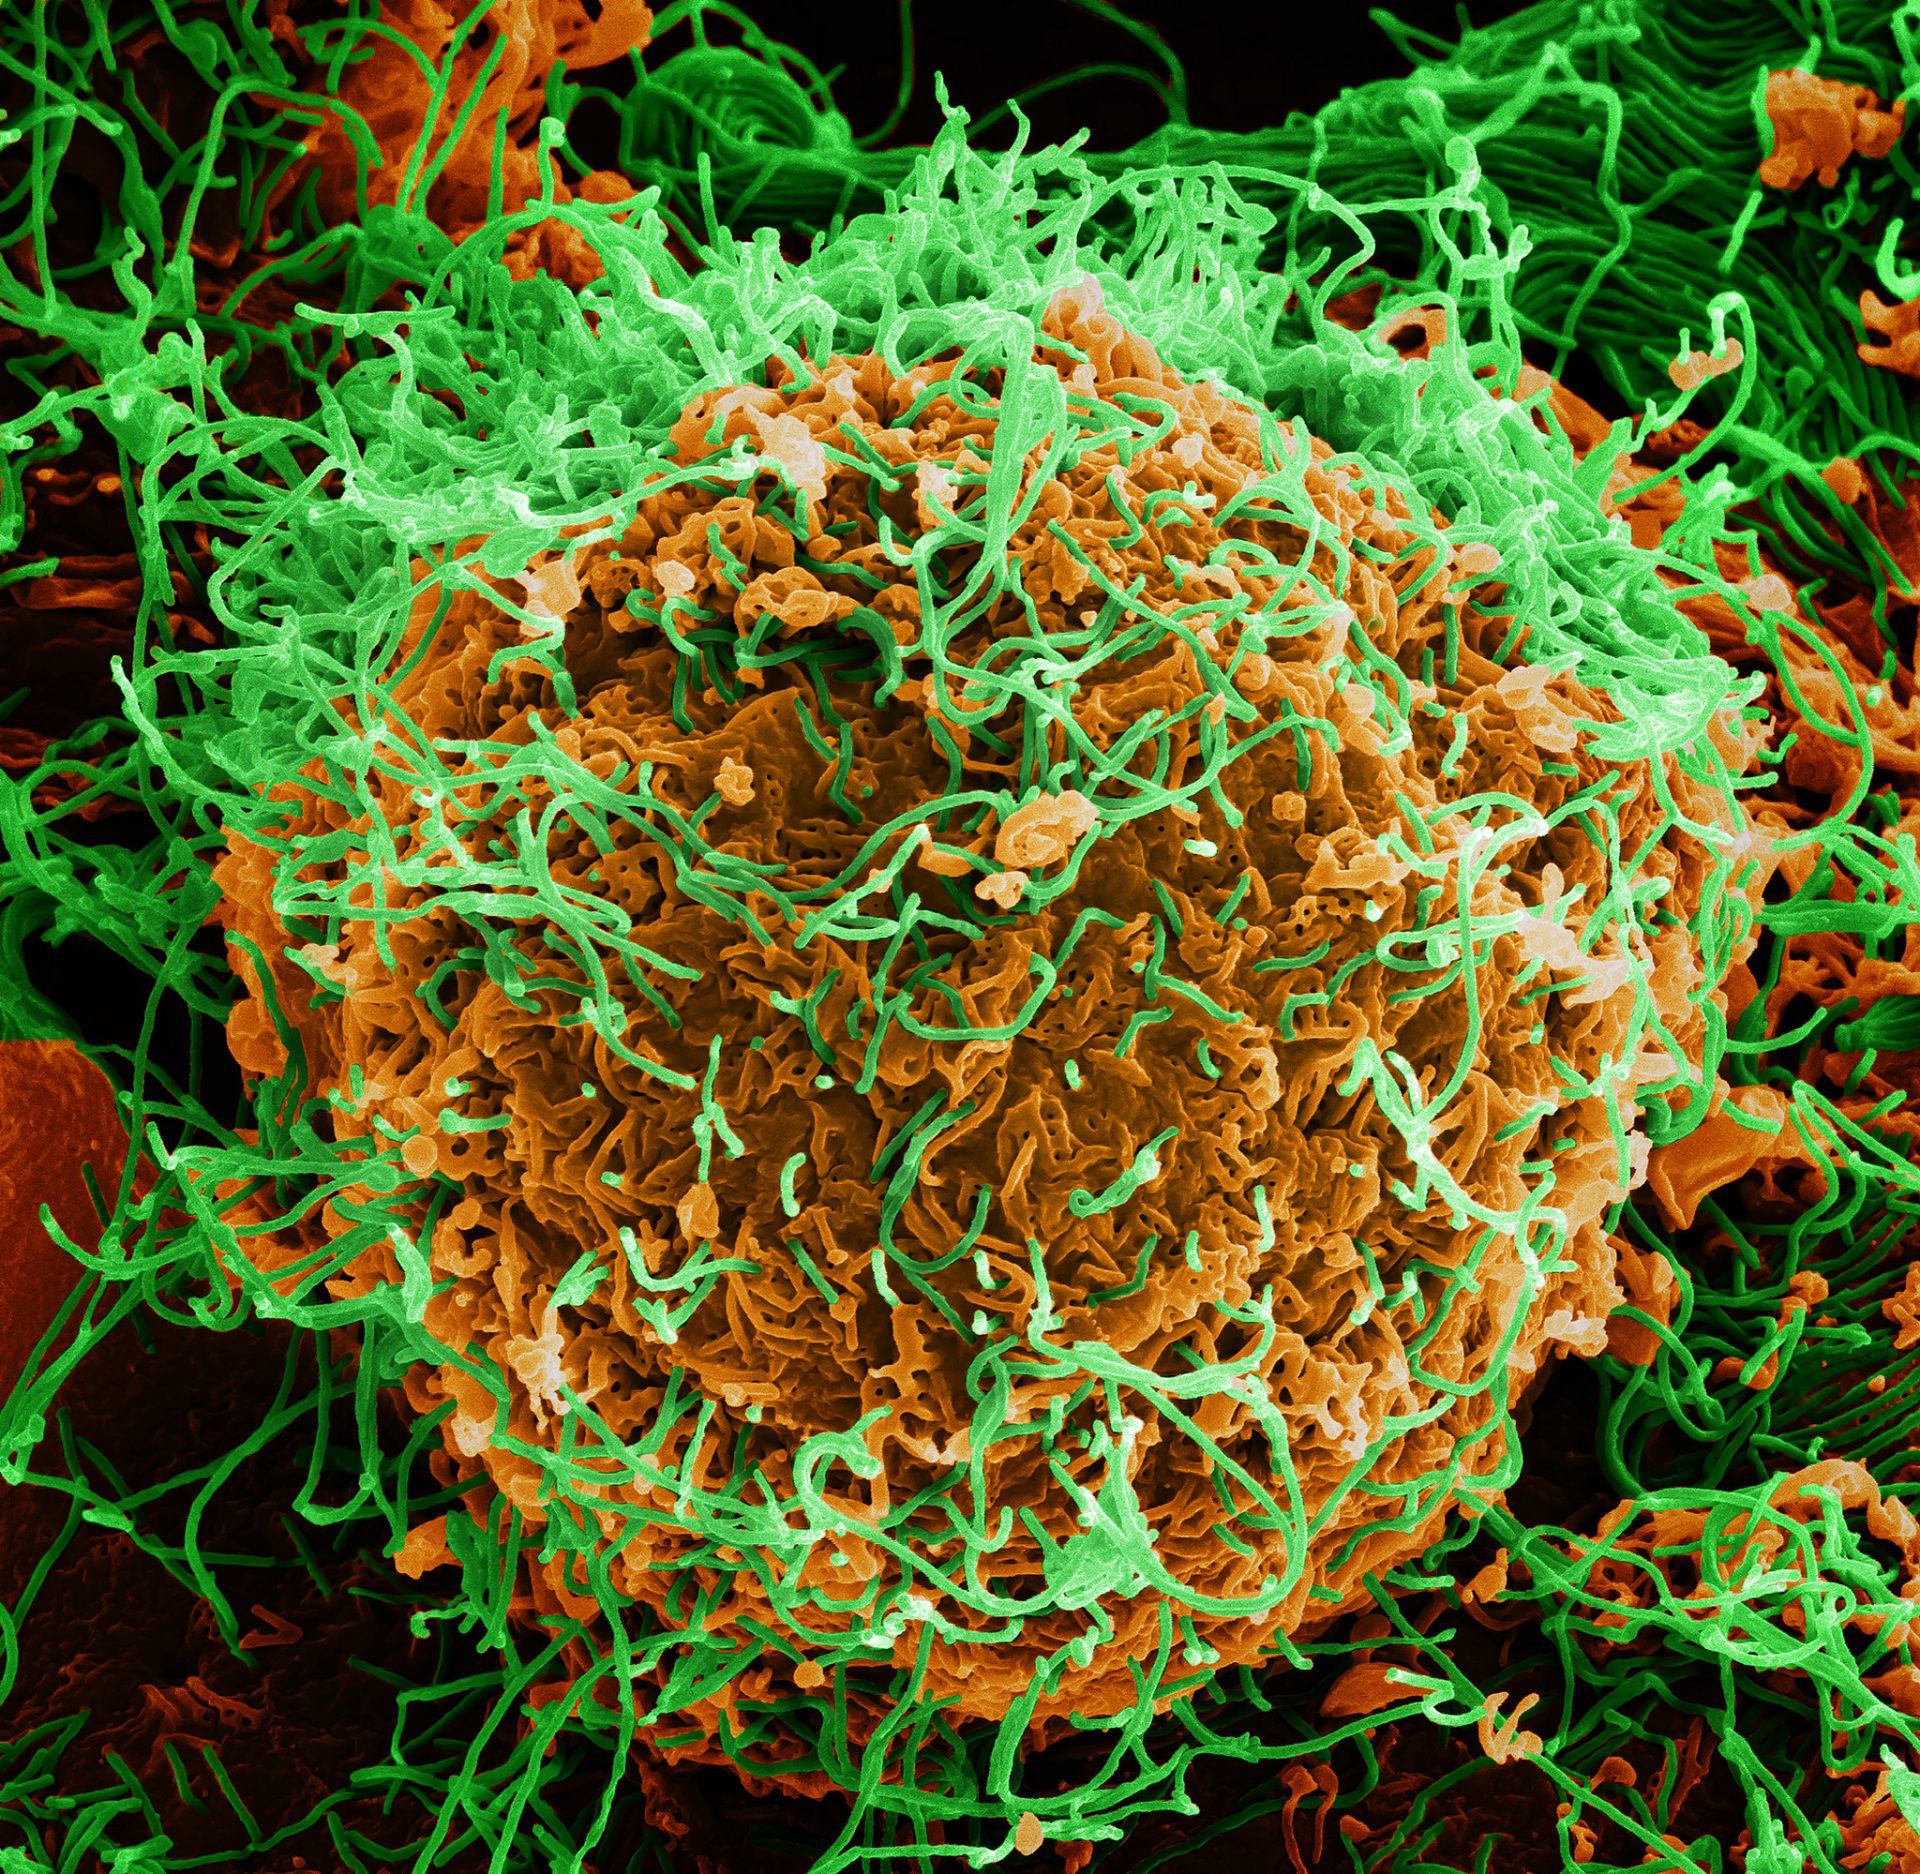 Colorized scanning electron micrograph of Ebola virus particles (green) both budding and attached to the surface of infected VERO E6 cells (orange). / Ebola